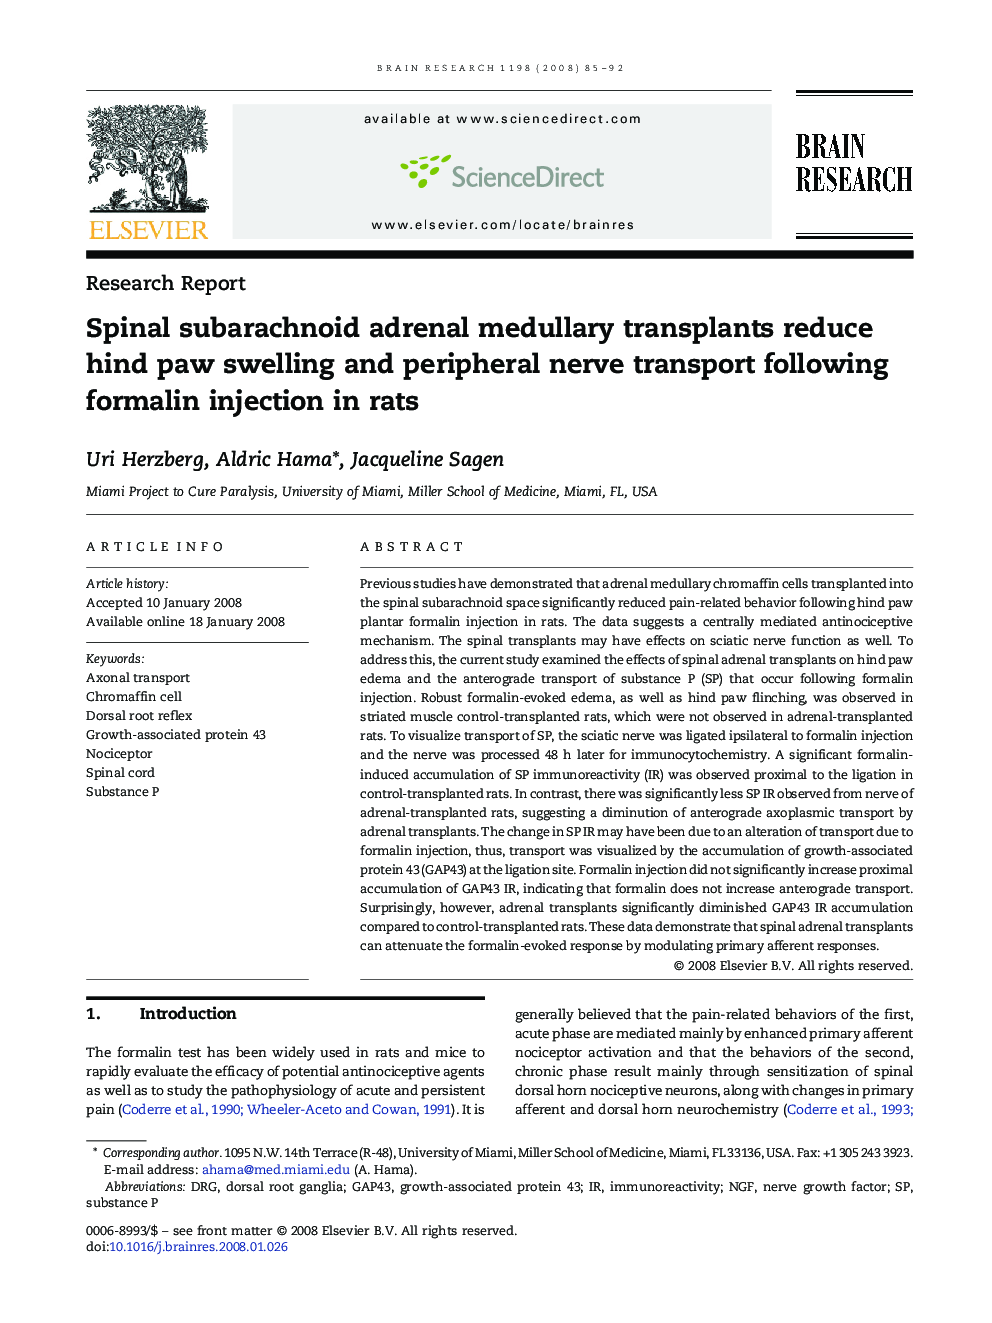 Spinal subarachnoid adrenal medullary transplants reduce hind paw swelling and peripheral nerve transport following formalin injection in rats